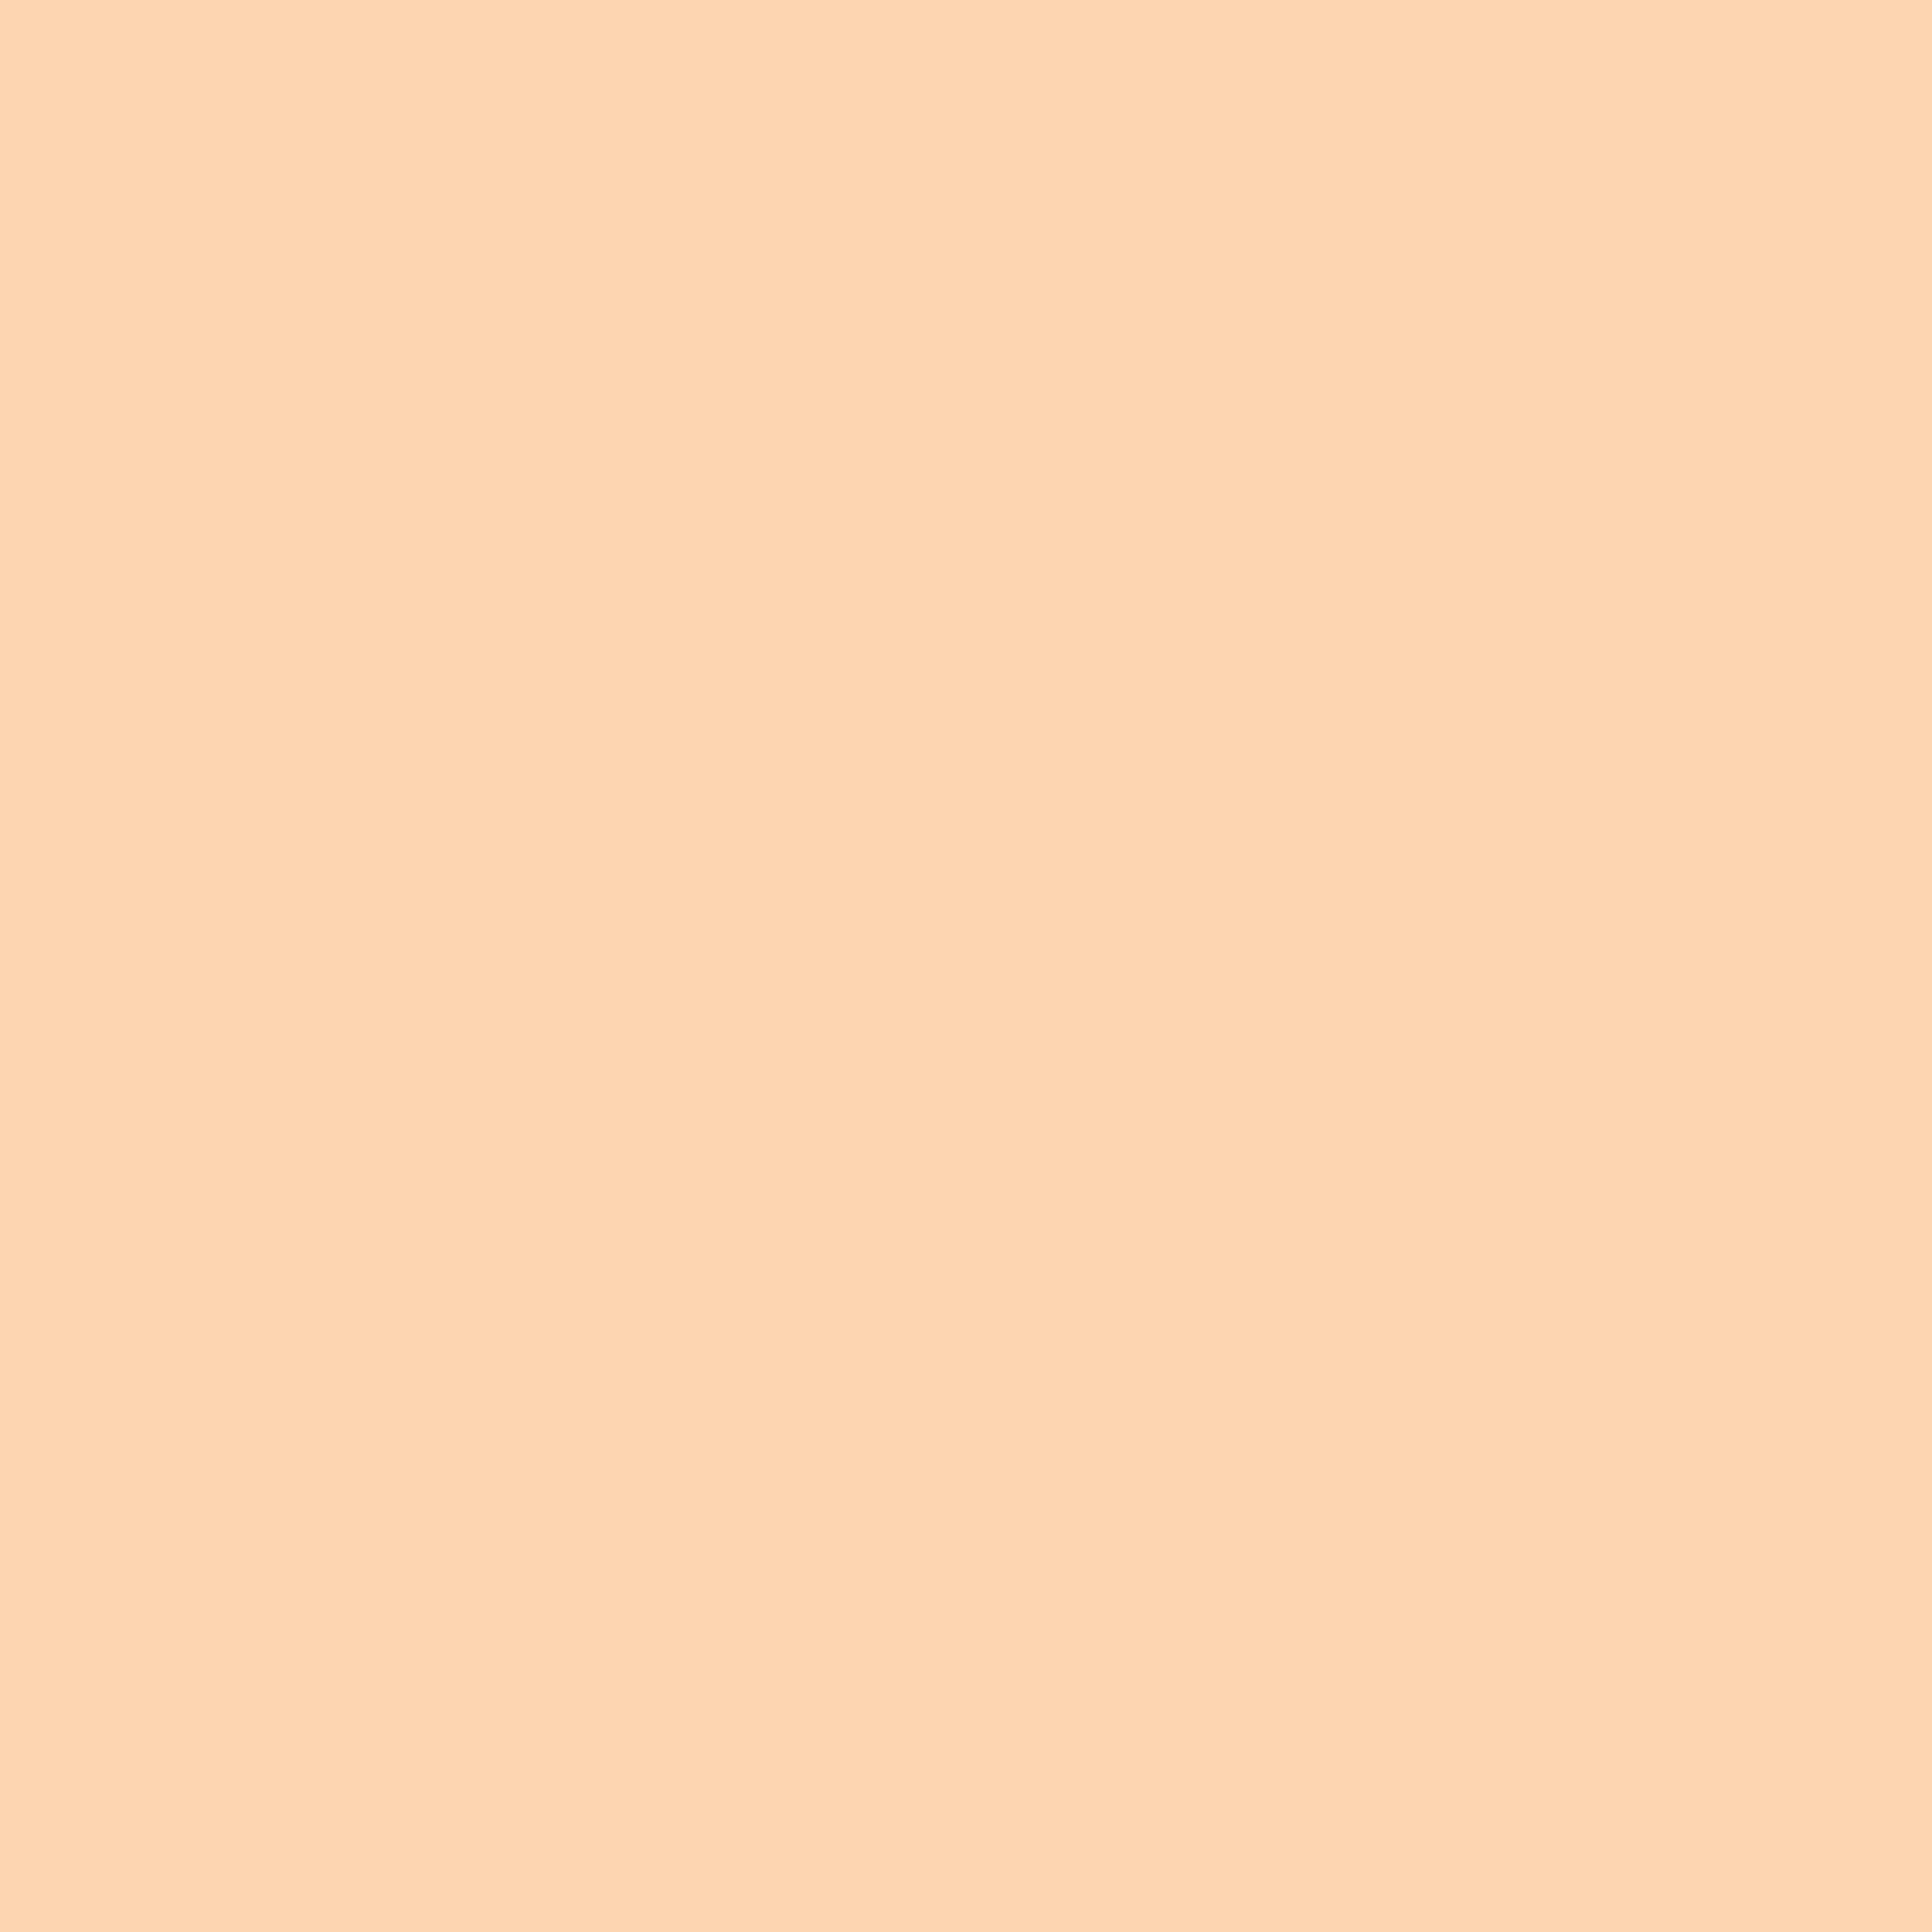 2048x2048 Light Apricot Solid Color Background